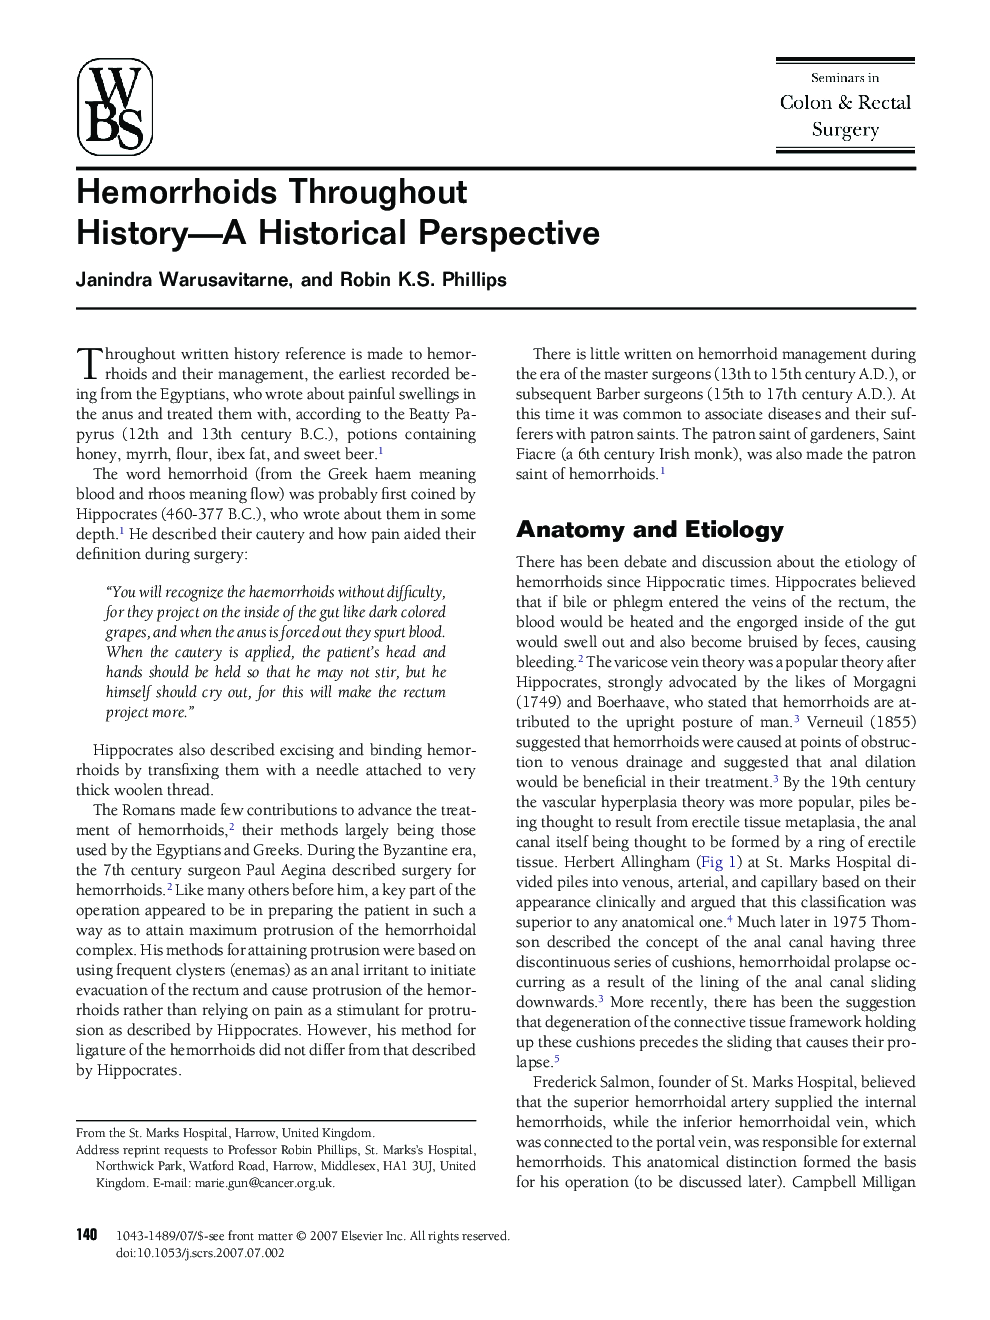 Hemorrhoids Throughout History-A Historical Perspective